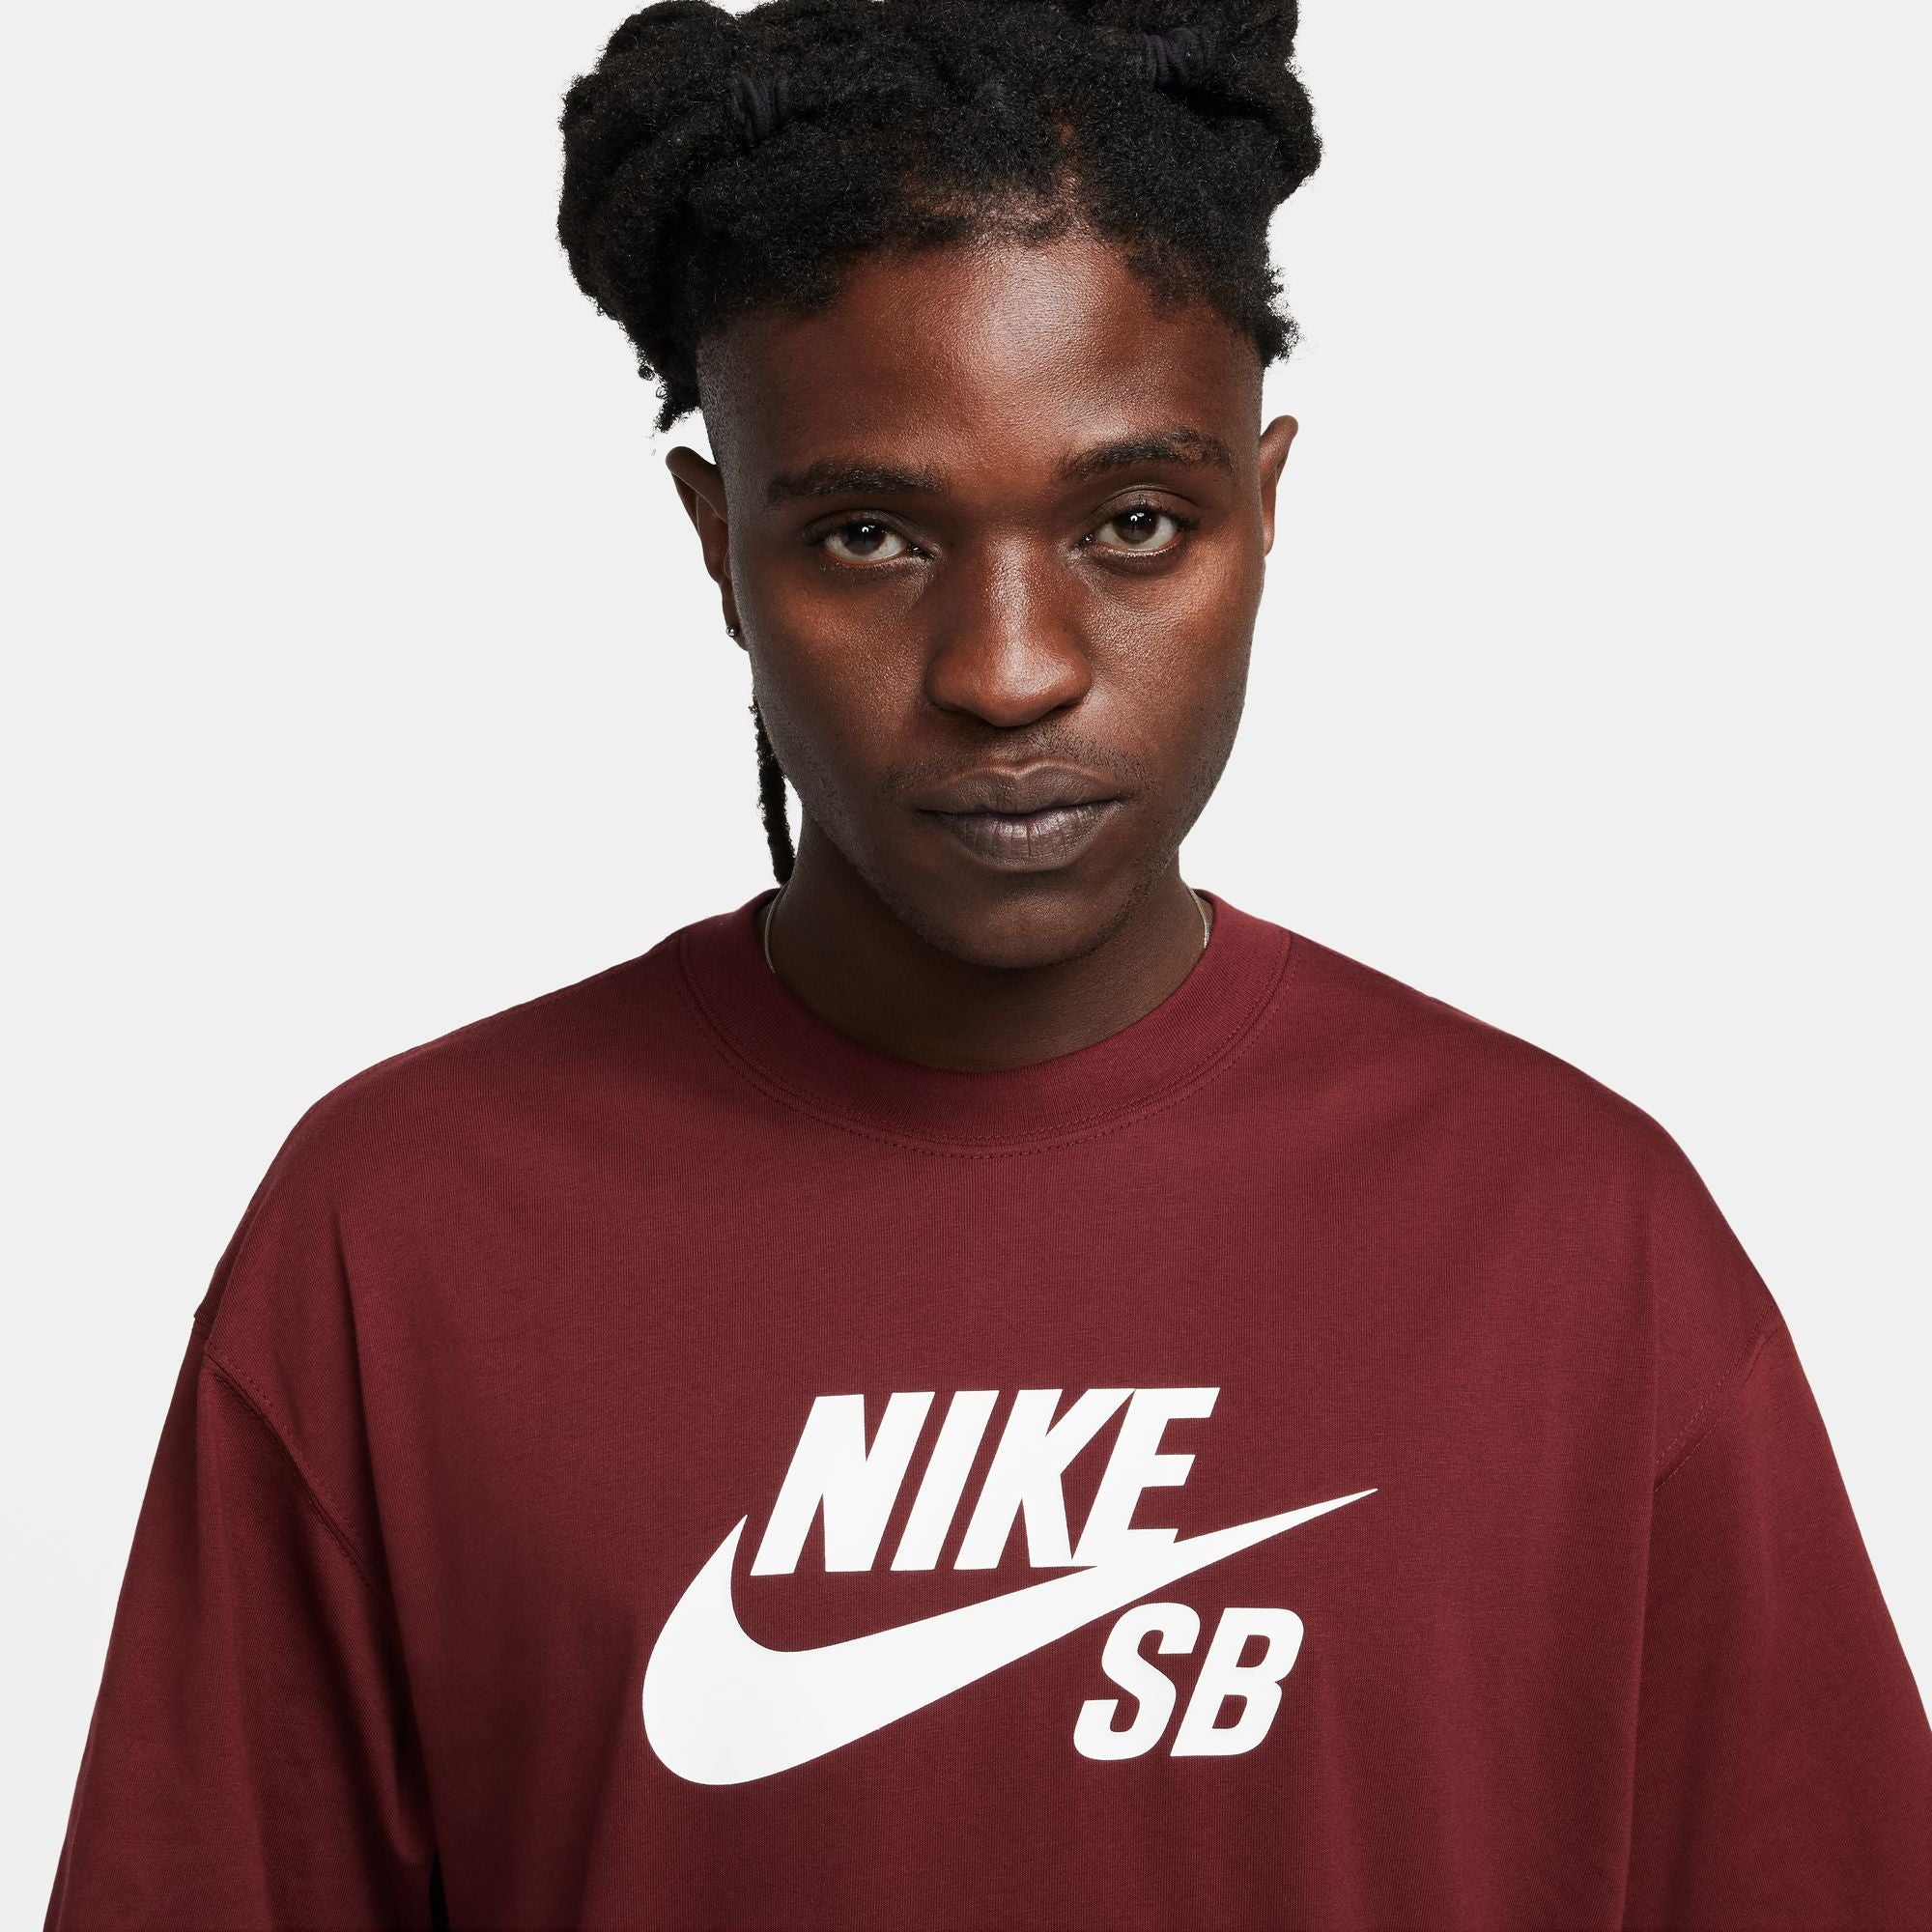 Logo T-shirt from Nike SB, in dark red colour with large white Nike SB Logo on front.